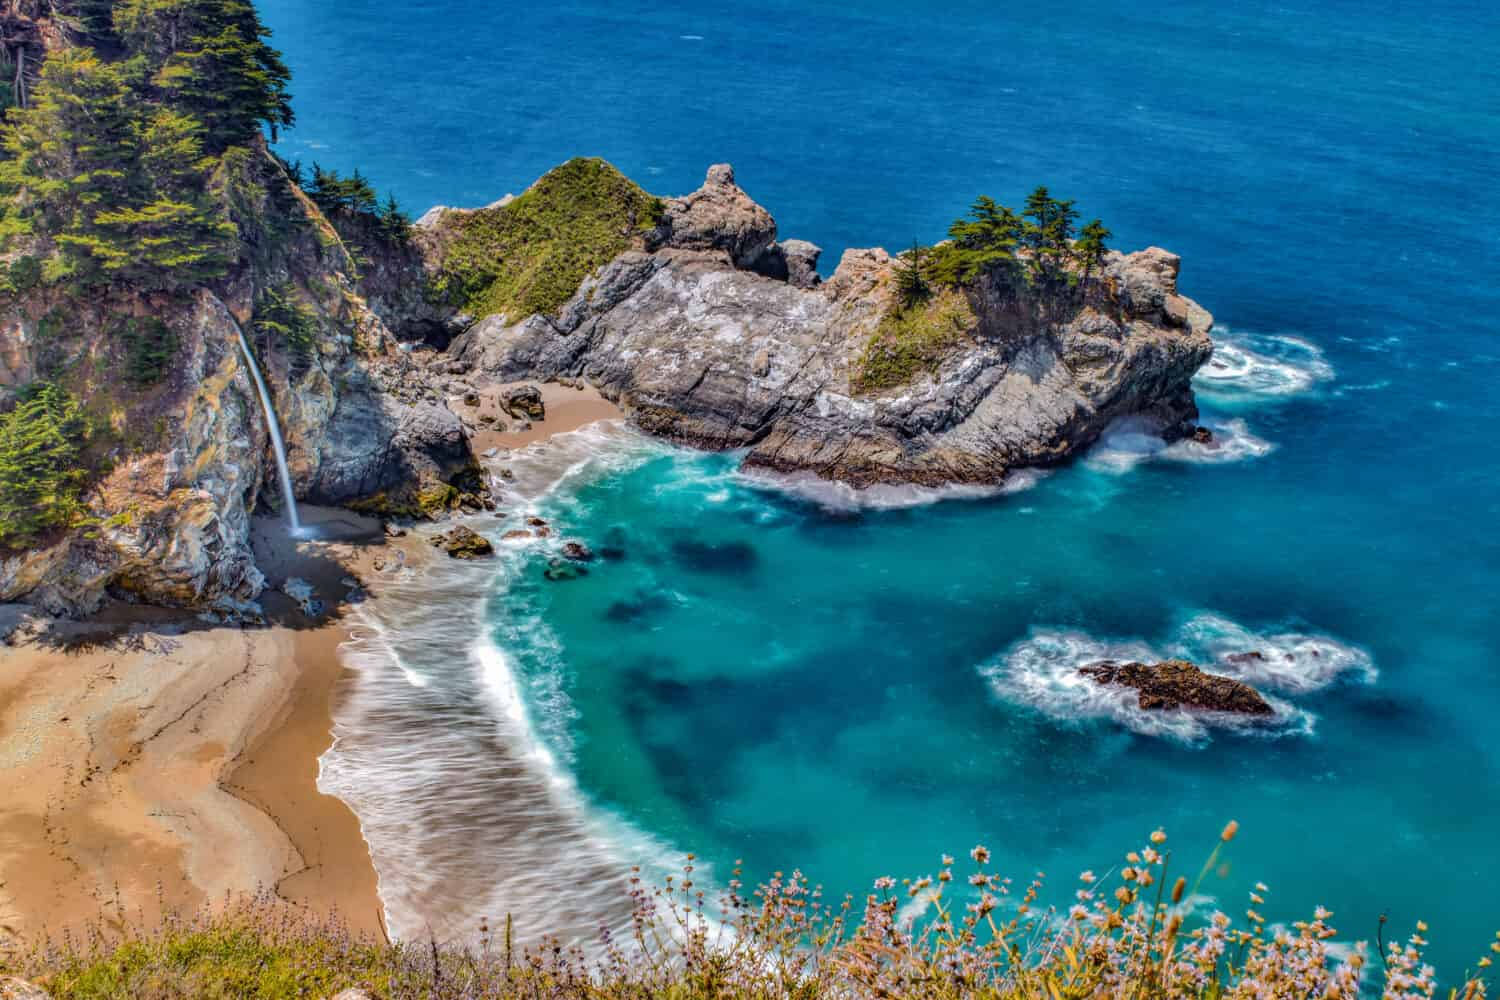 Water from McWay Falls descends on beach at the McWay Cove in Big Sur, California.